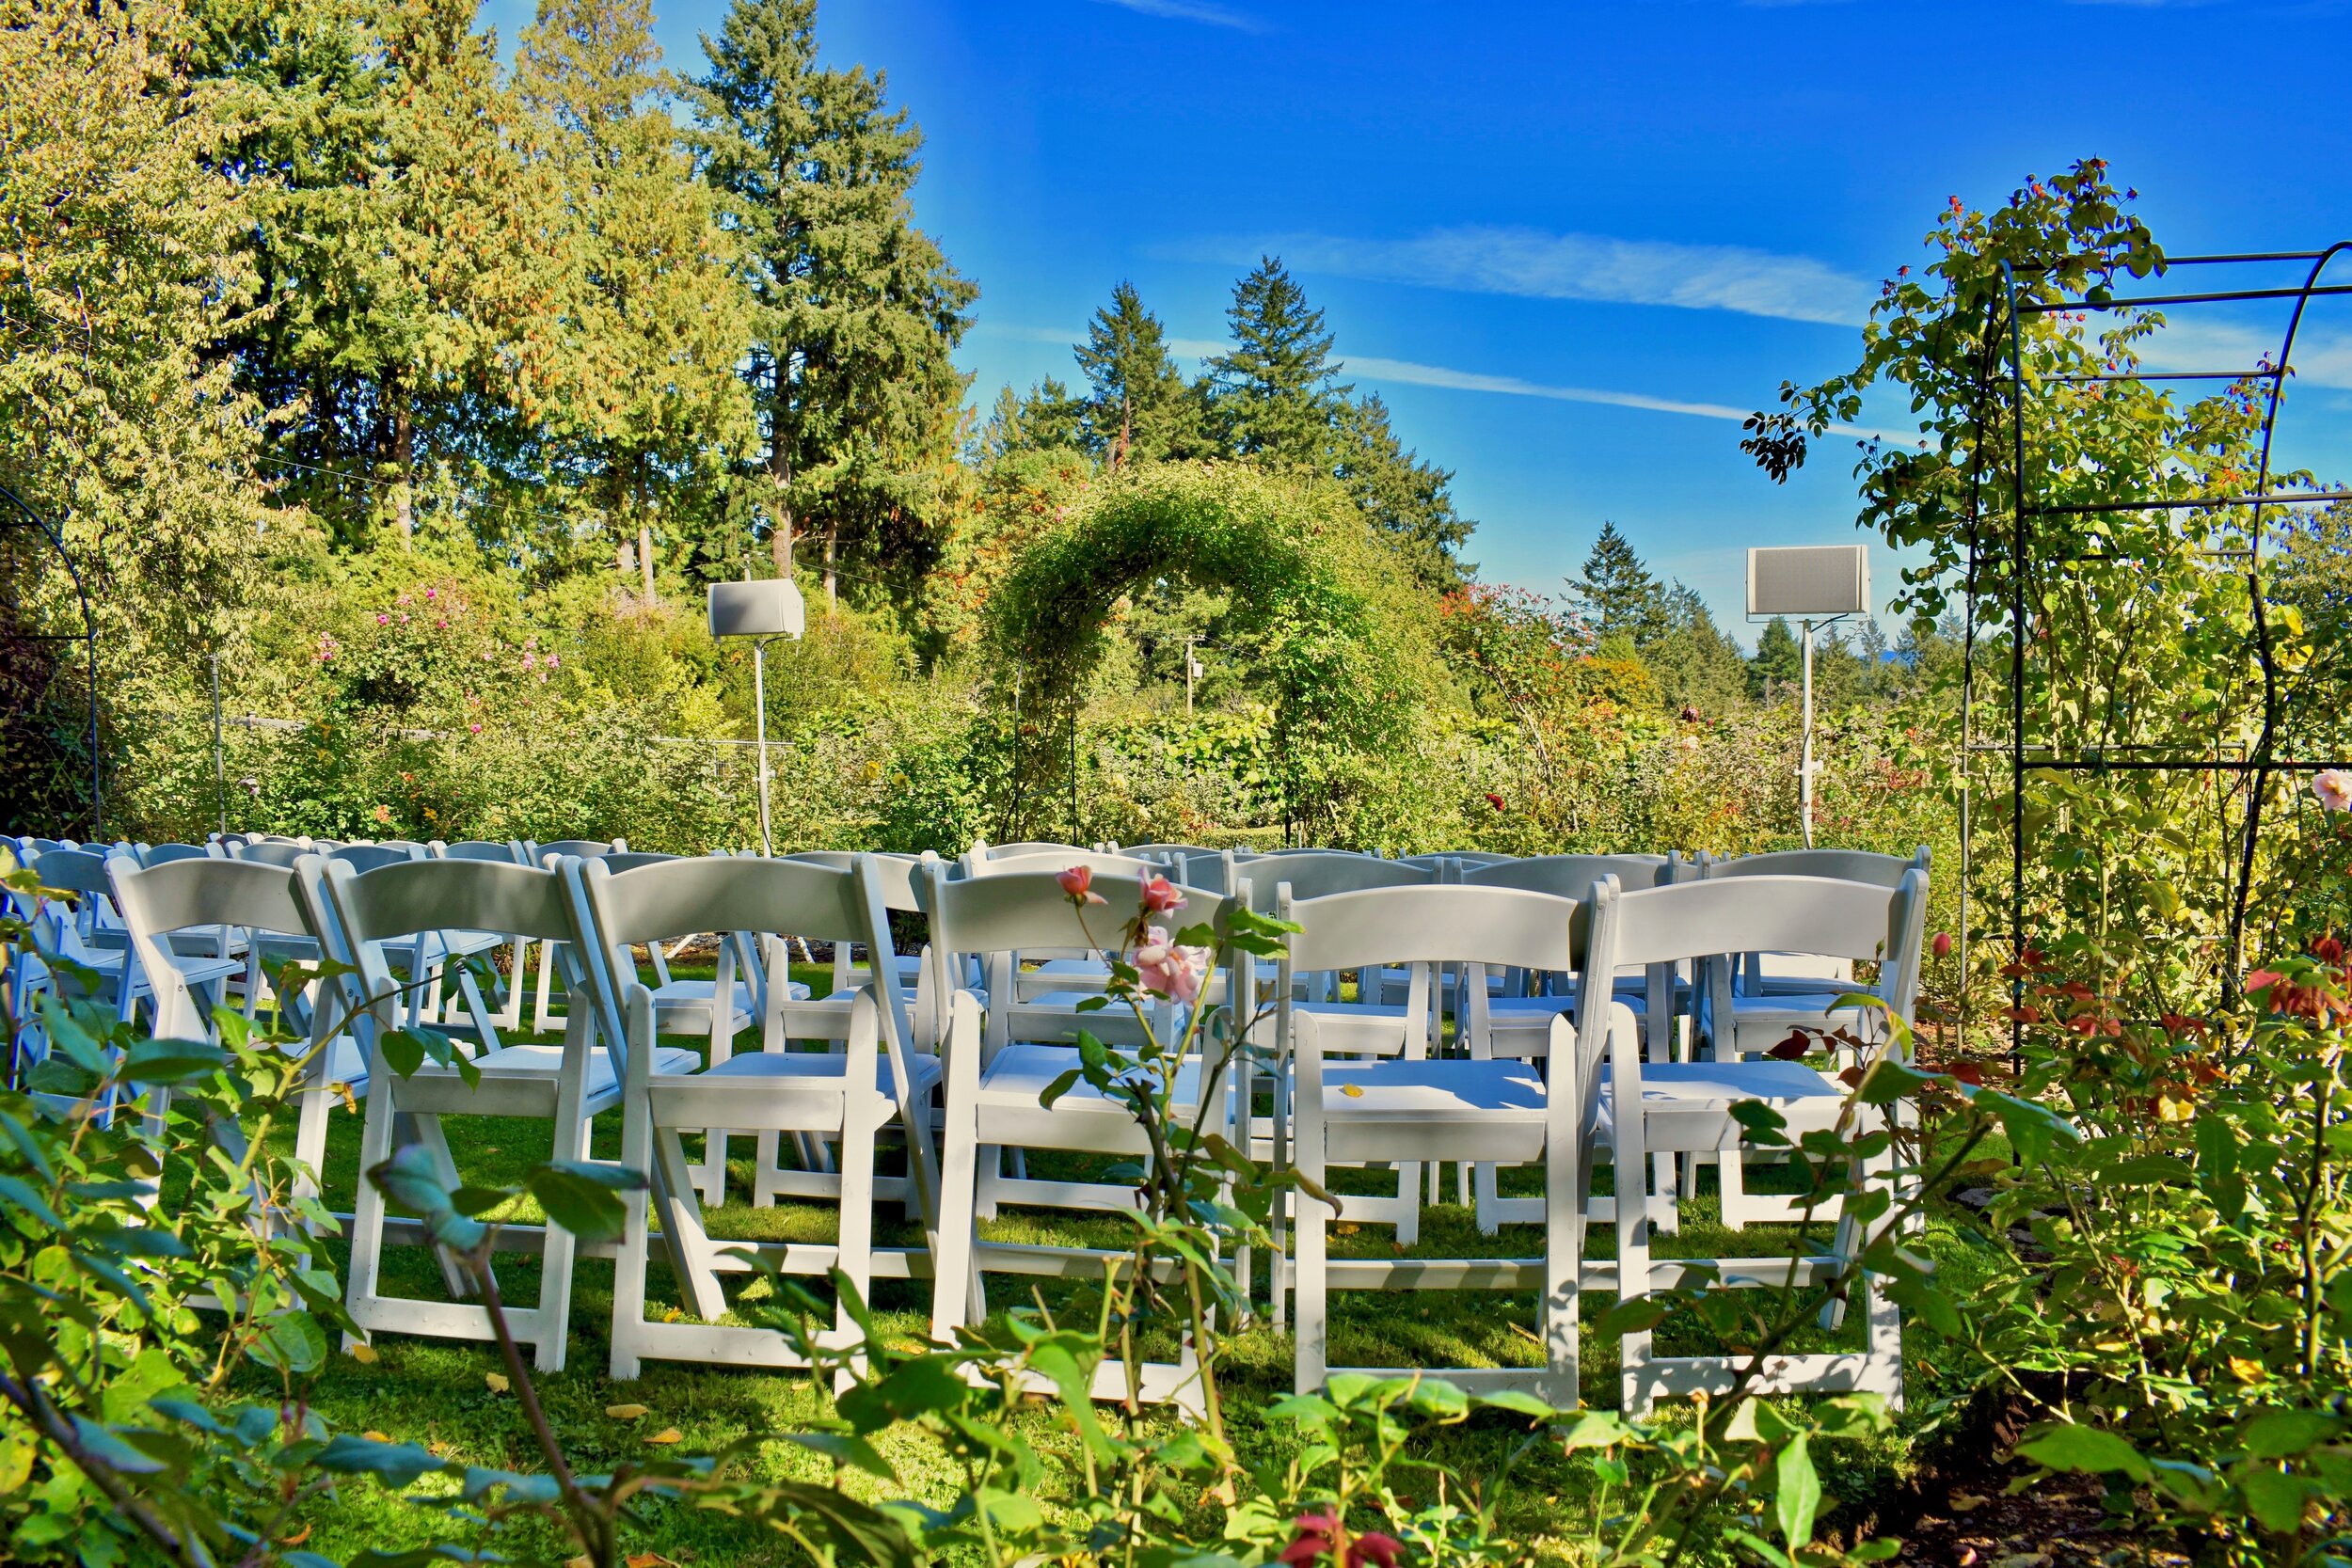 Wedding Ceremony at Starling Lane Vineyard in a Rose Garden.  Danley Sound Labs GO2-8CX Speakers, 2021